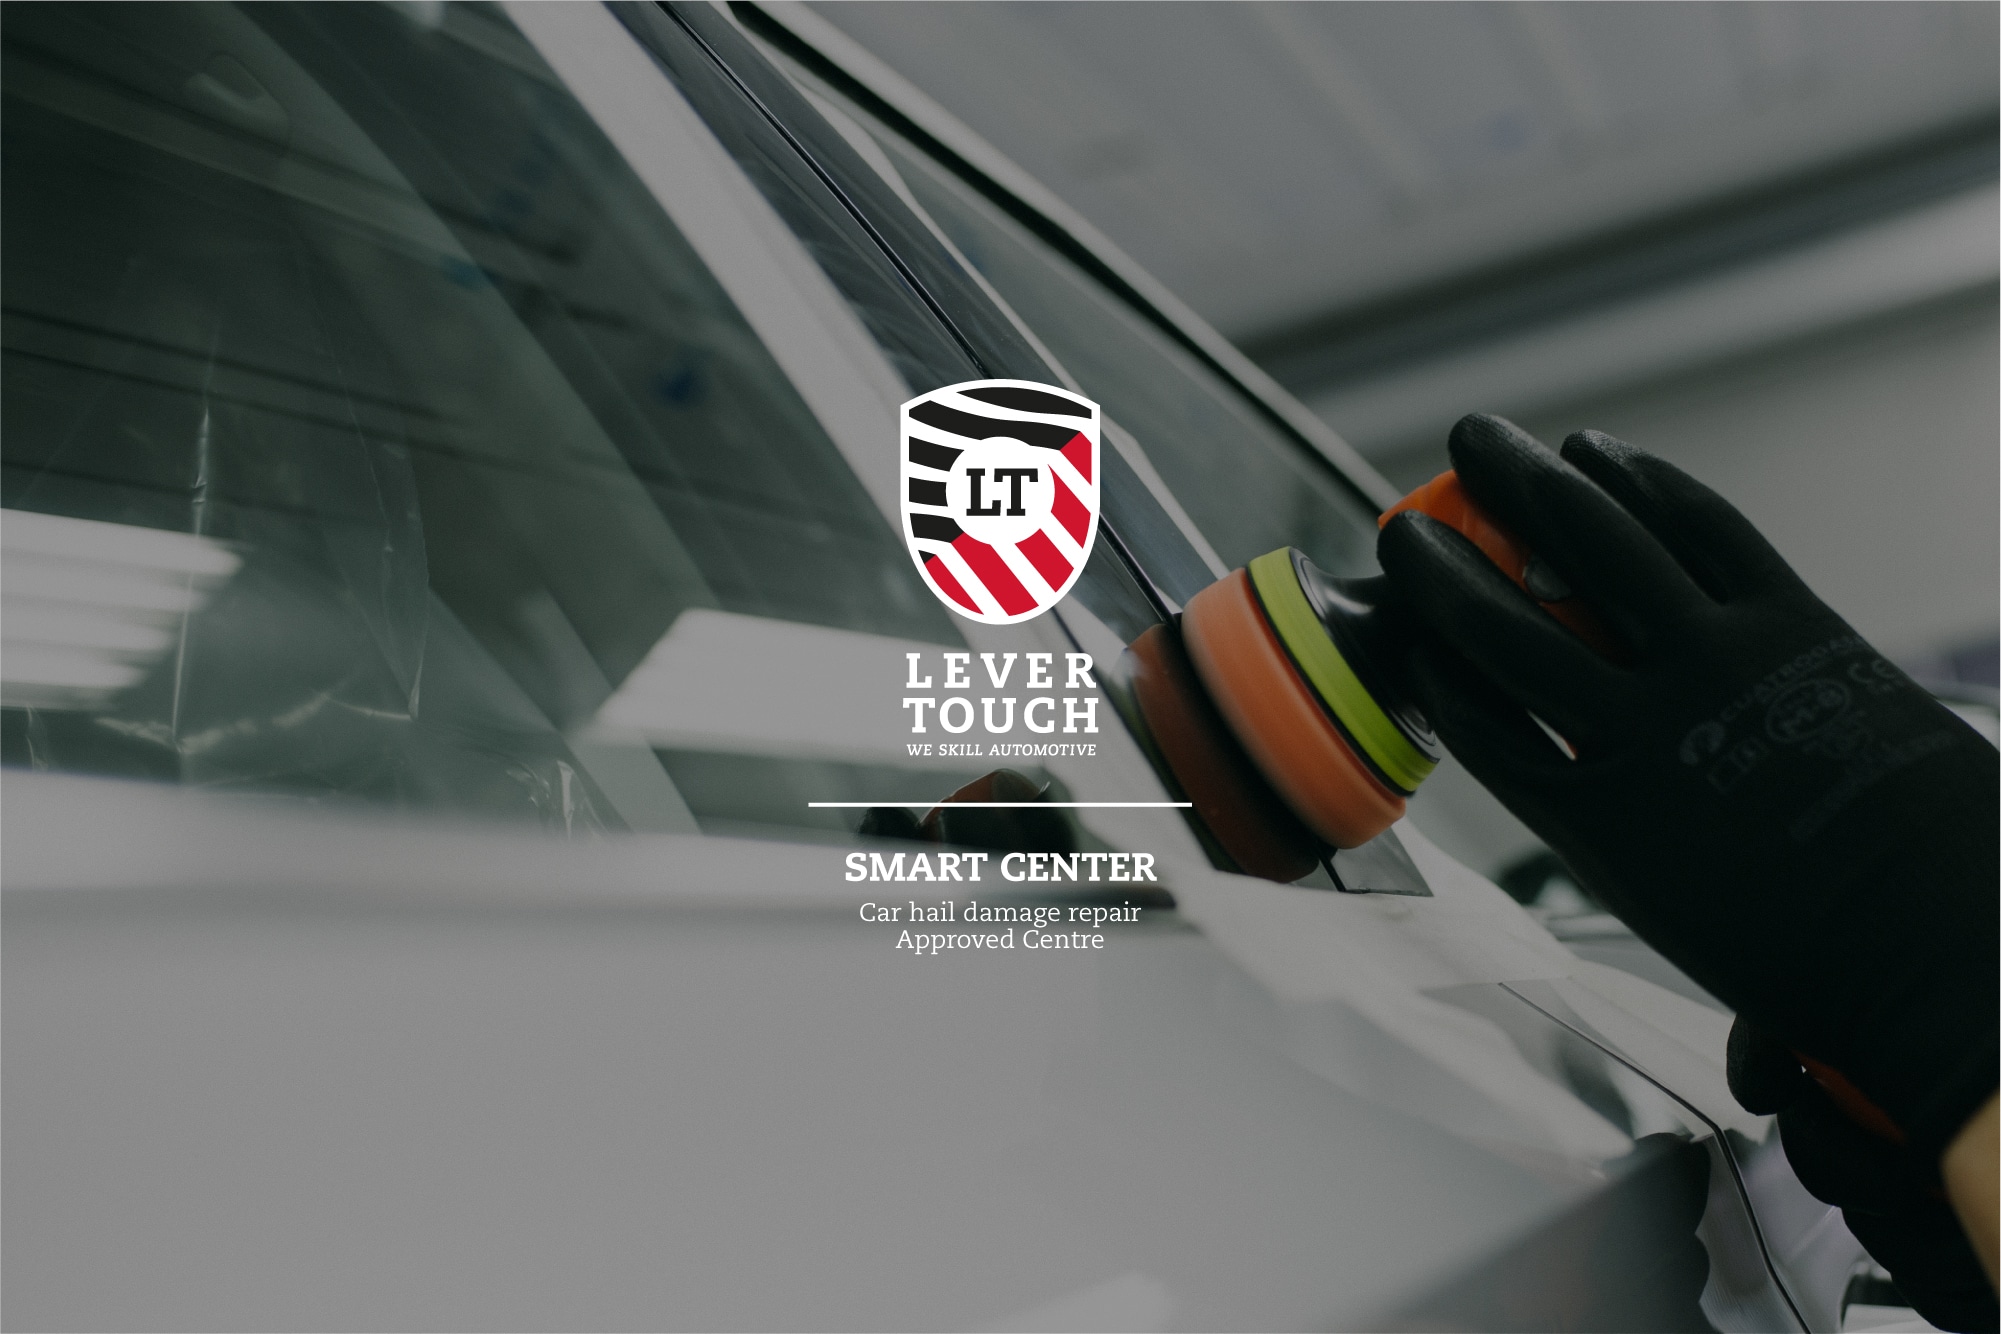 Repair Shops specialized in hail damages in Italy: the Lever Touch Smart Centers